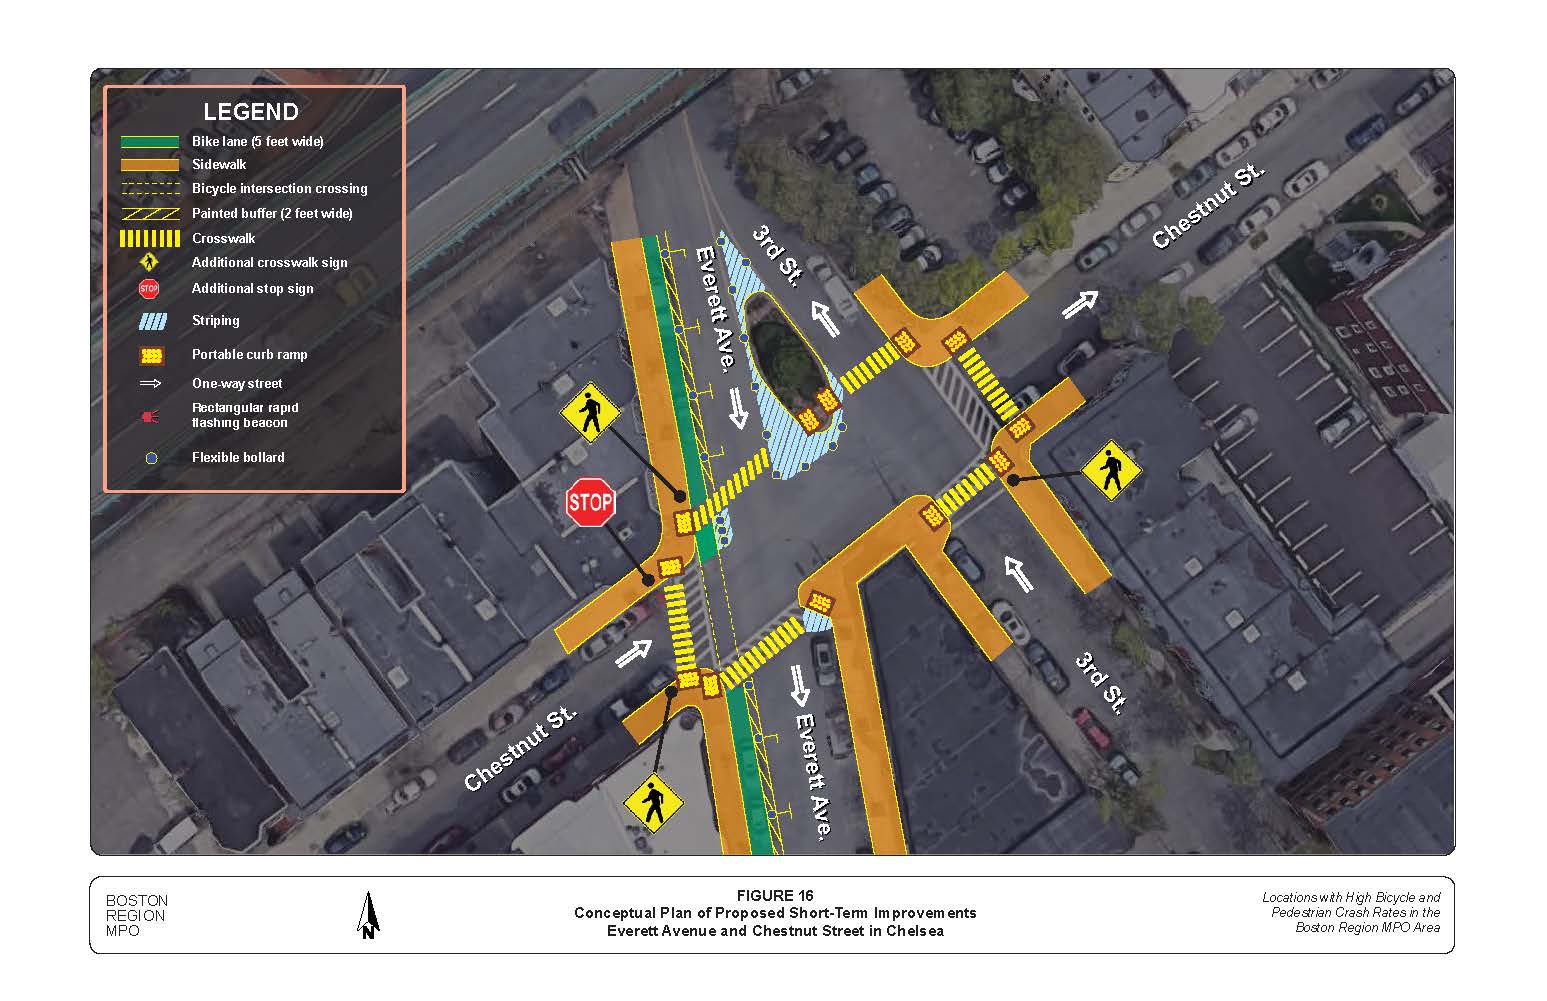 Figure 16
Conceptual Plan of Proposed Short-Term Improvements
Everett Avenue and Chestnut Street in Chelsea